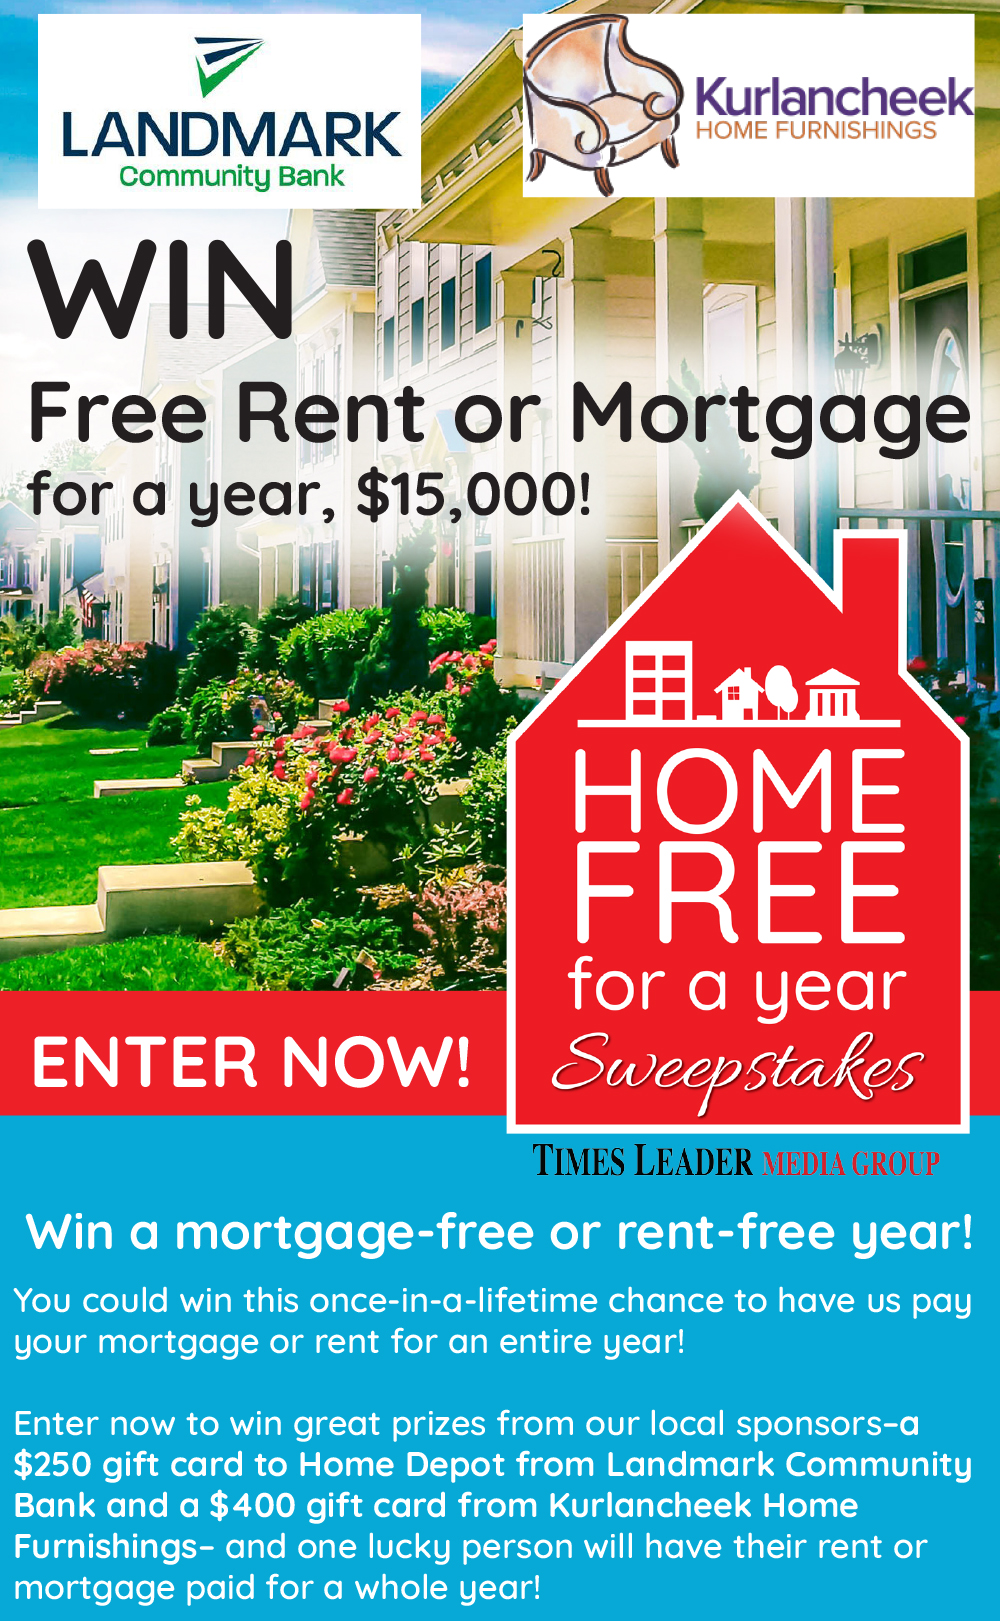 Win Free Rent or Mortgage for a Year, 15,000! Times Leader